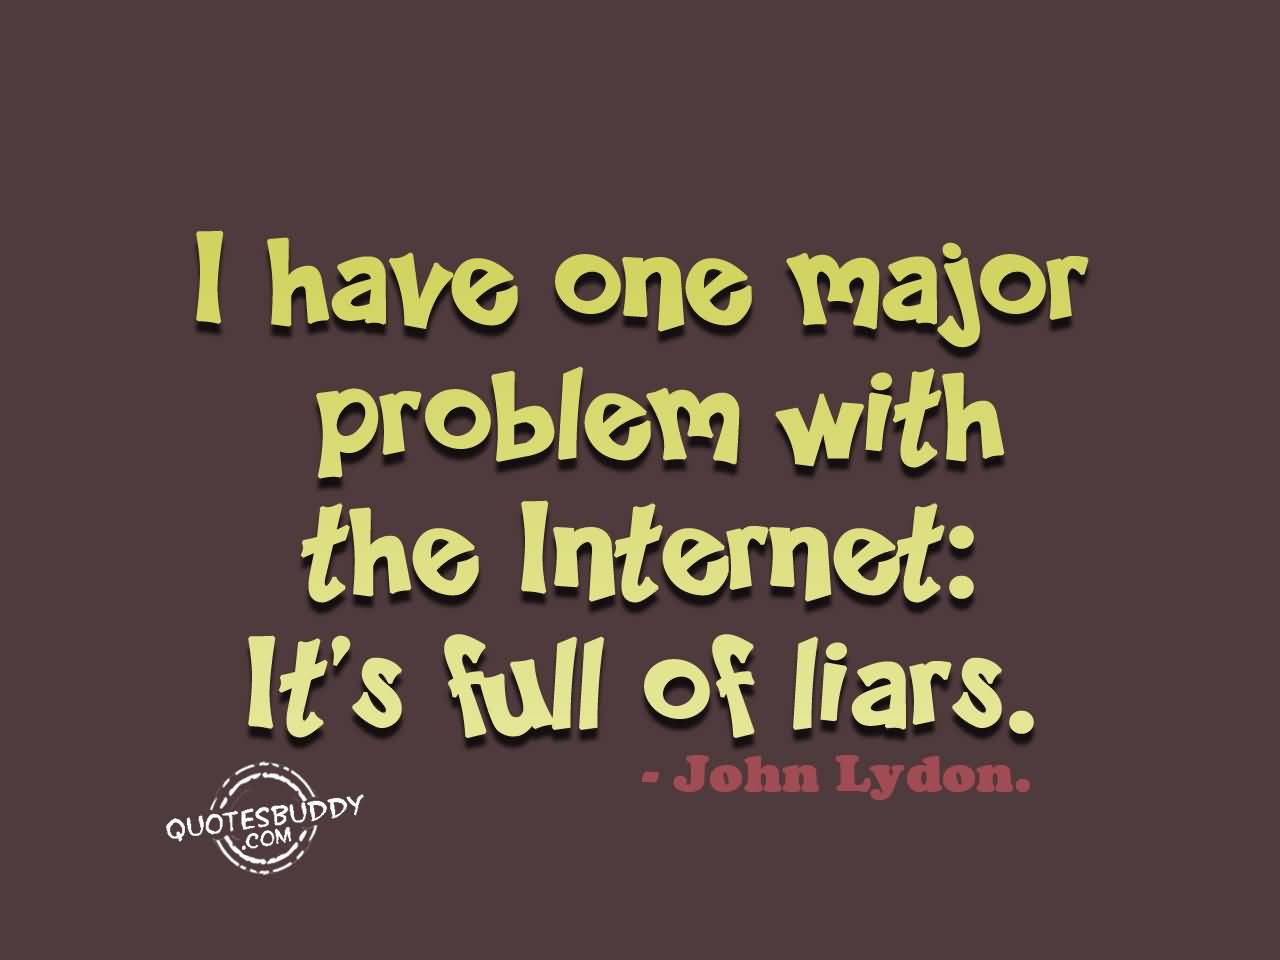 I have one major problem with the Internet,It's full of liars. John Lydon